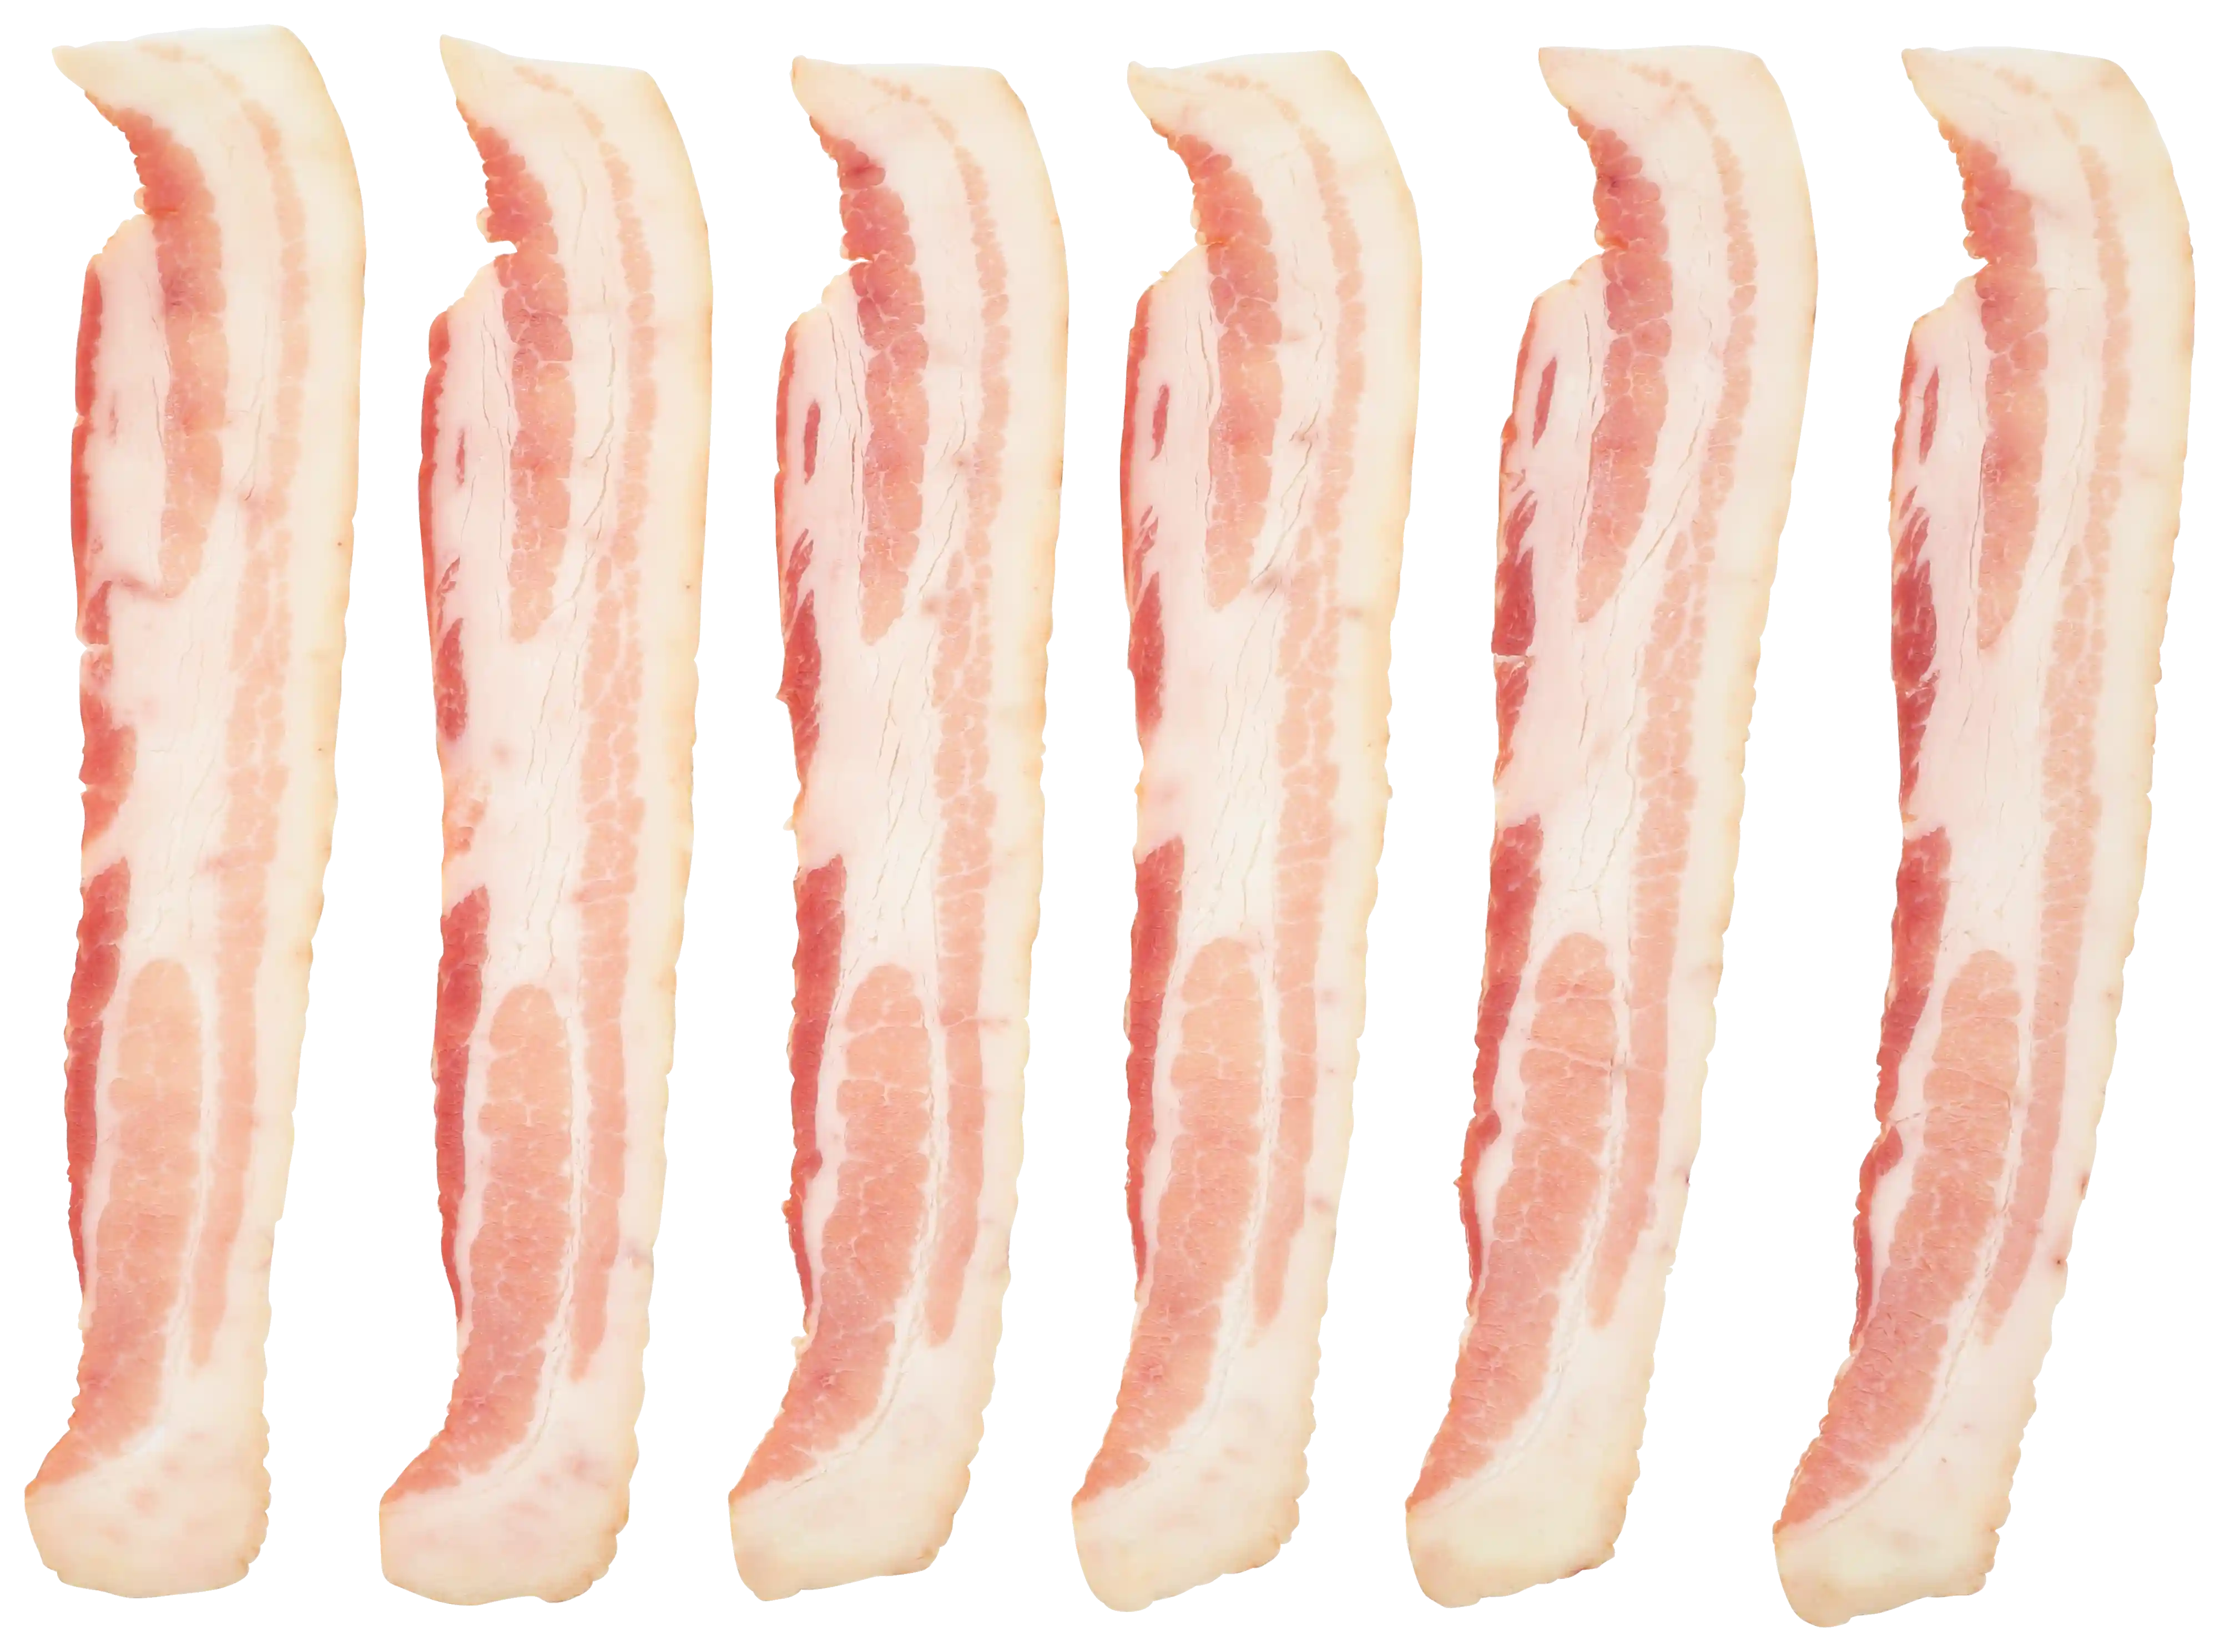 Wright® Brand Naturally Hickory Smoked Extra Thin Sliced Bacon, Flat-Pack®, 15 Lbs, 22-26 Slices per Pound, Frozen_image_11